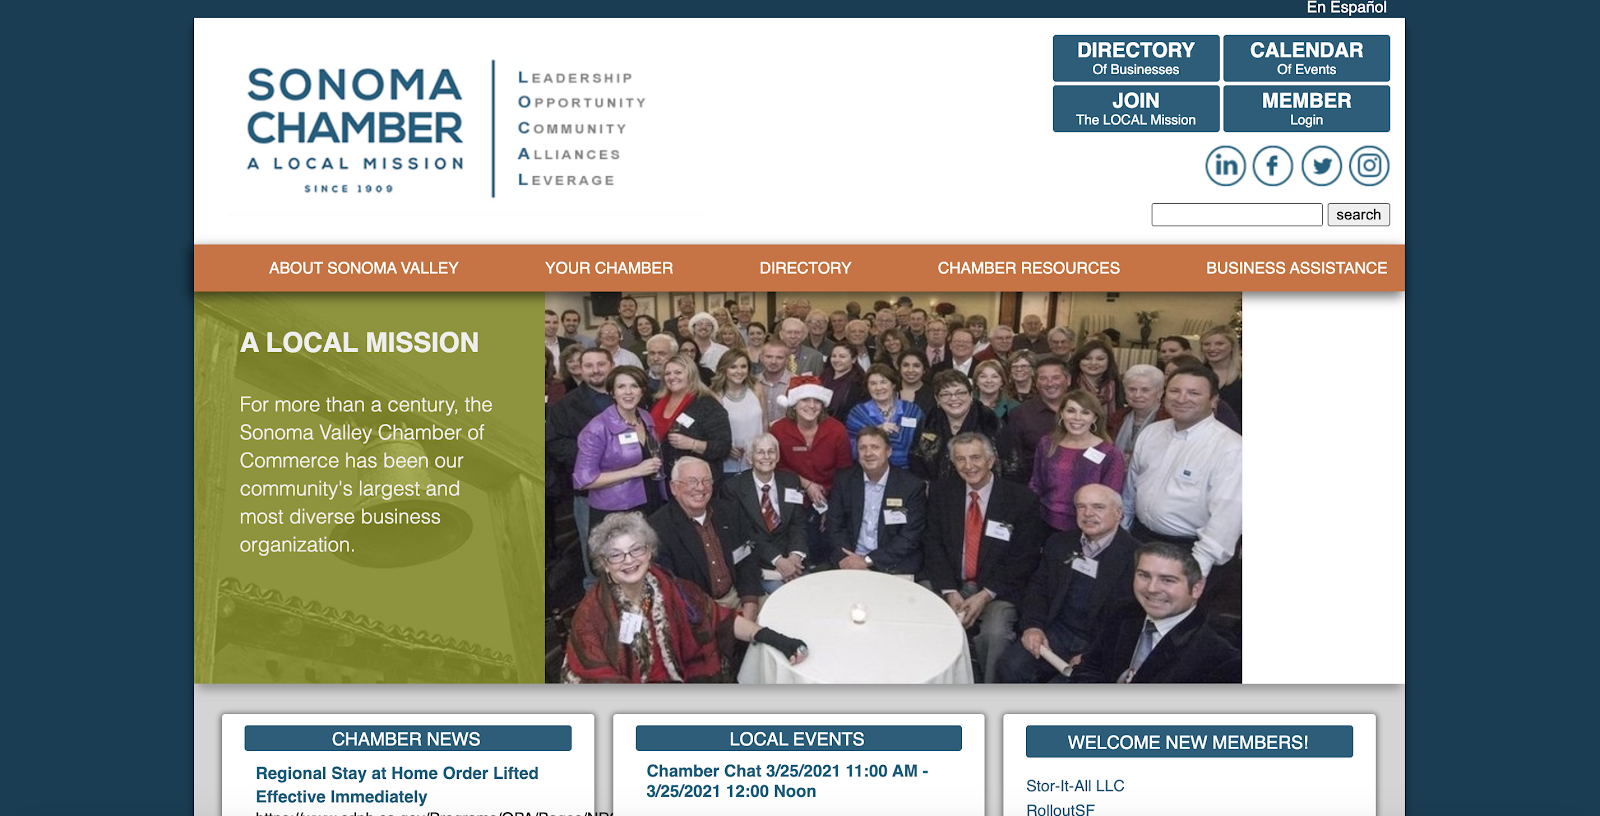 Sonoma Chamber of Commerce website displaying a mission statement next to a photo of their members at a formal party, sporting nametags.  